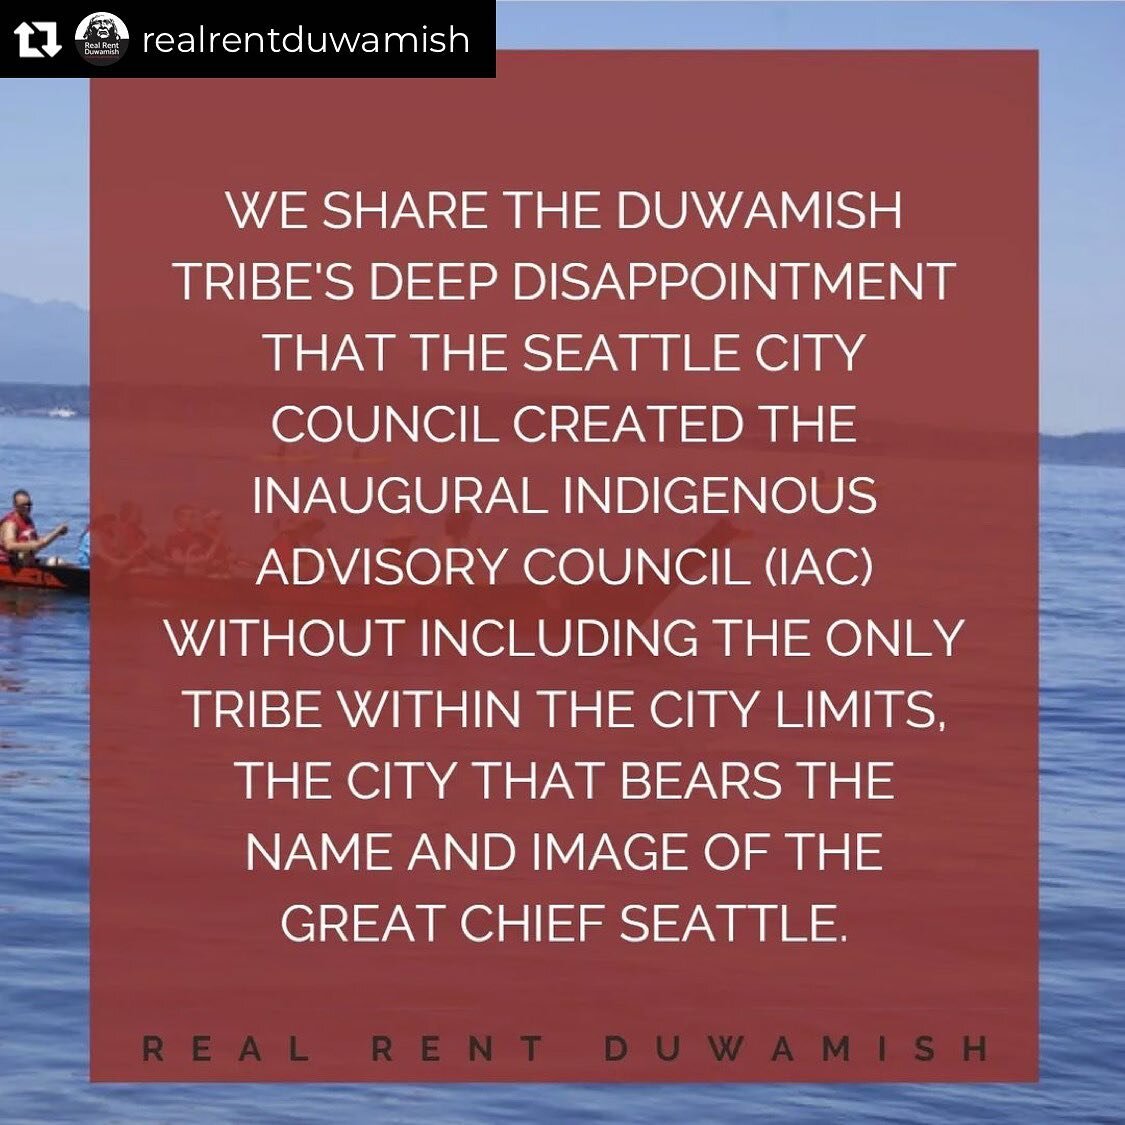 Repost from @realrentduwamish
&bull;
We share the @duwamishtribe deep disappointment that the Seattle City Council created the inaugural Indigenous Advisory Council (IAC) without including the only tribe within the city limits, a city that bears the 